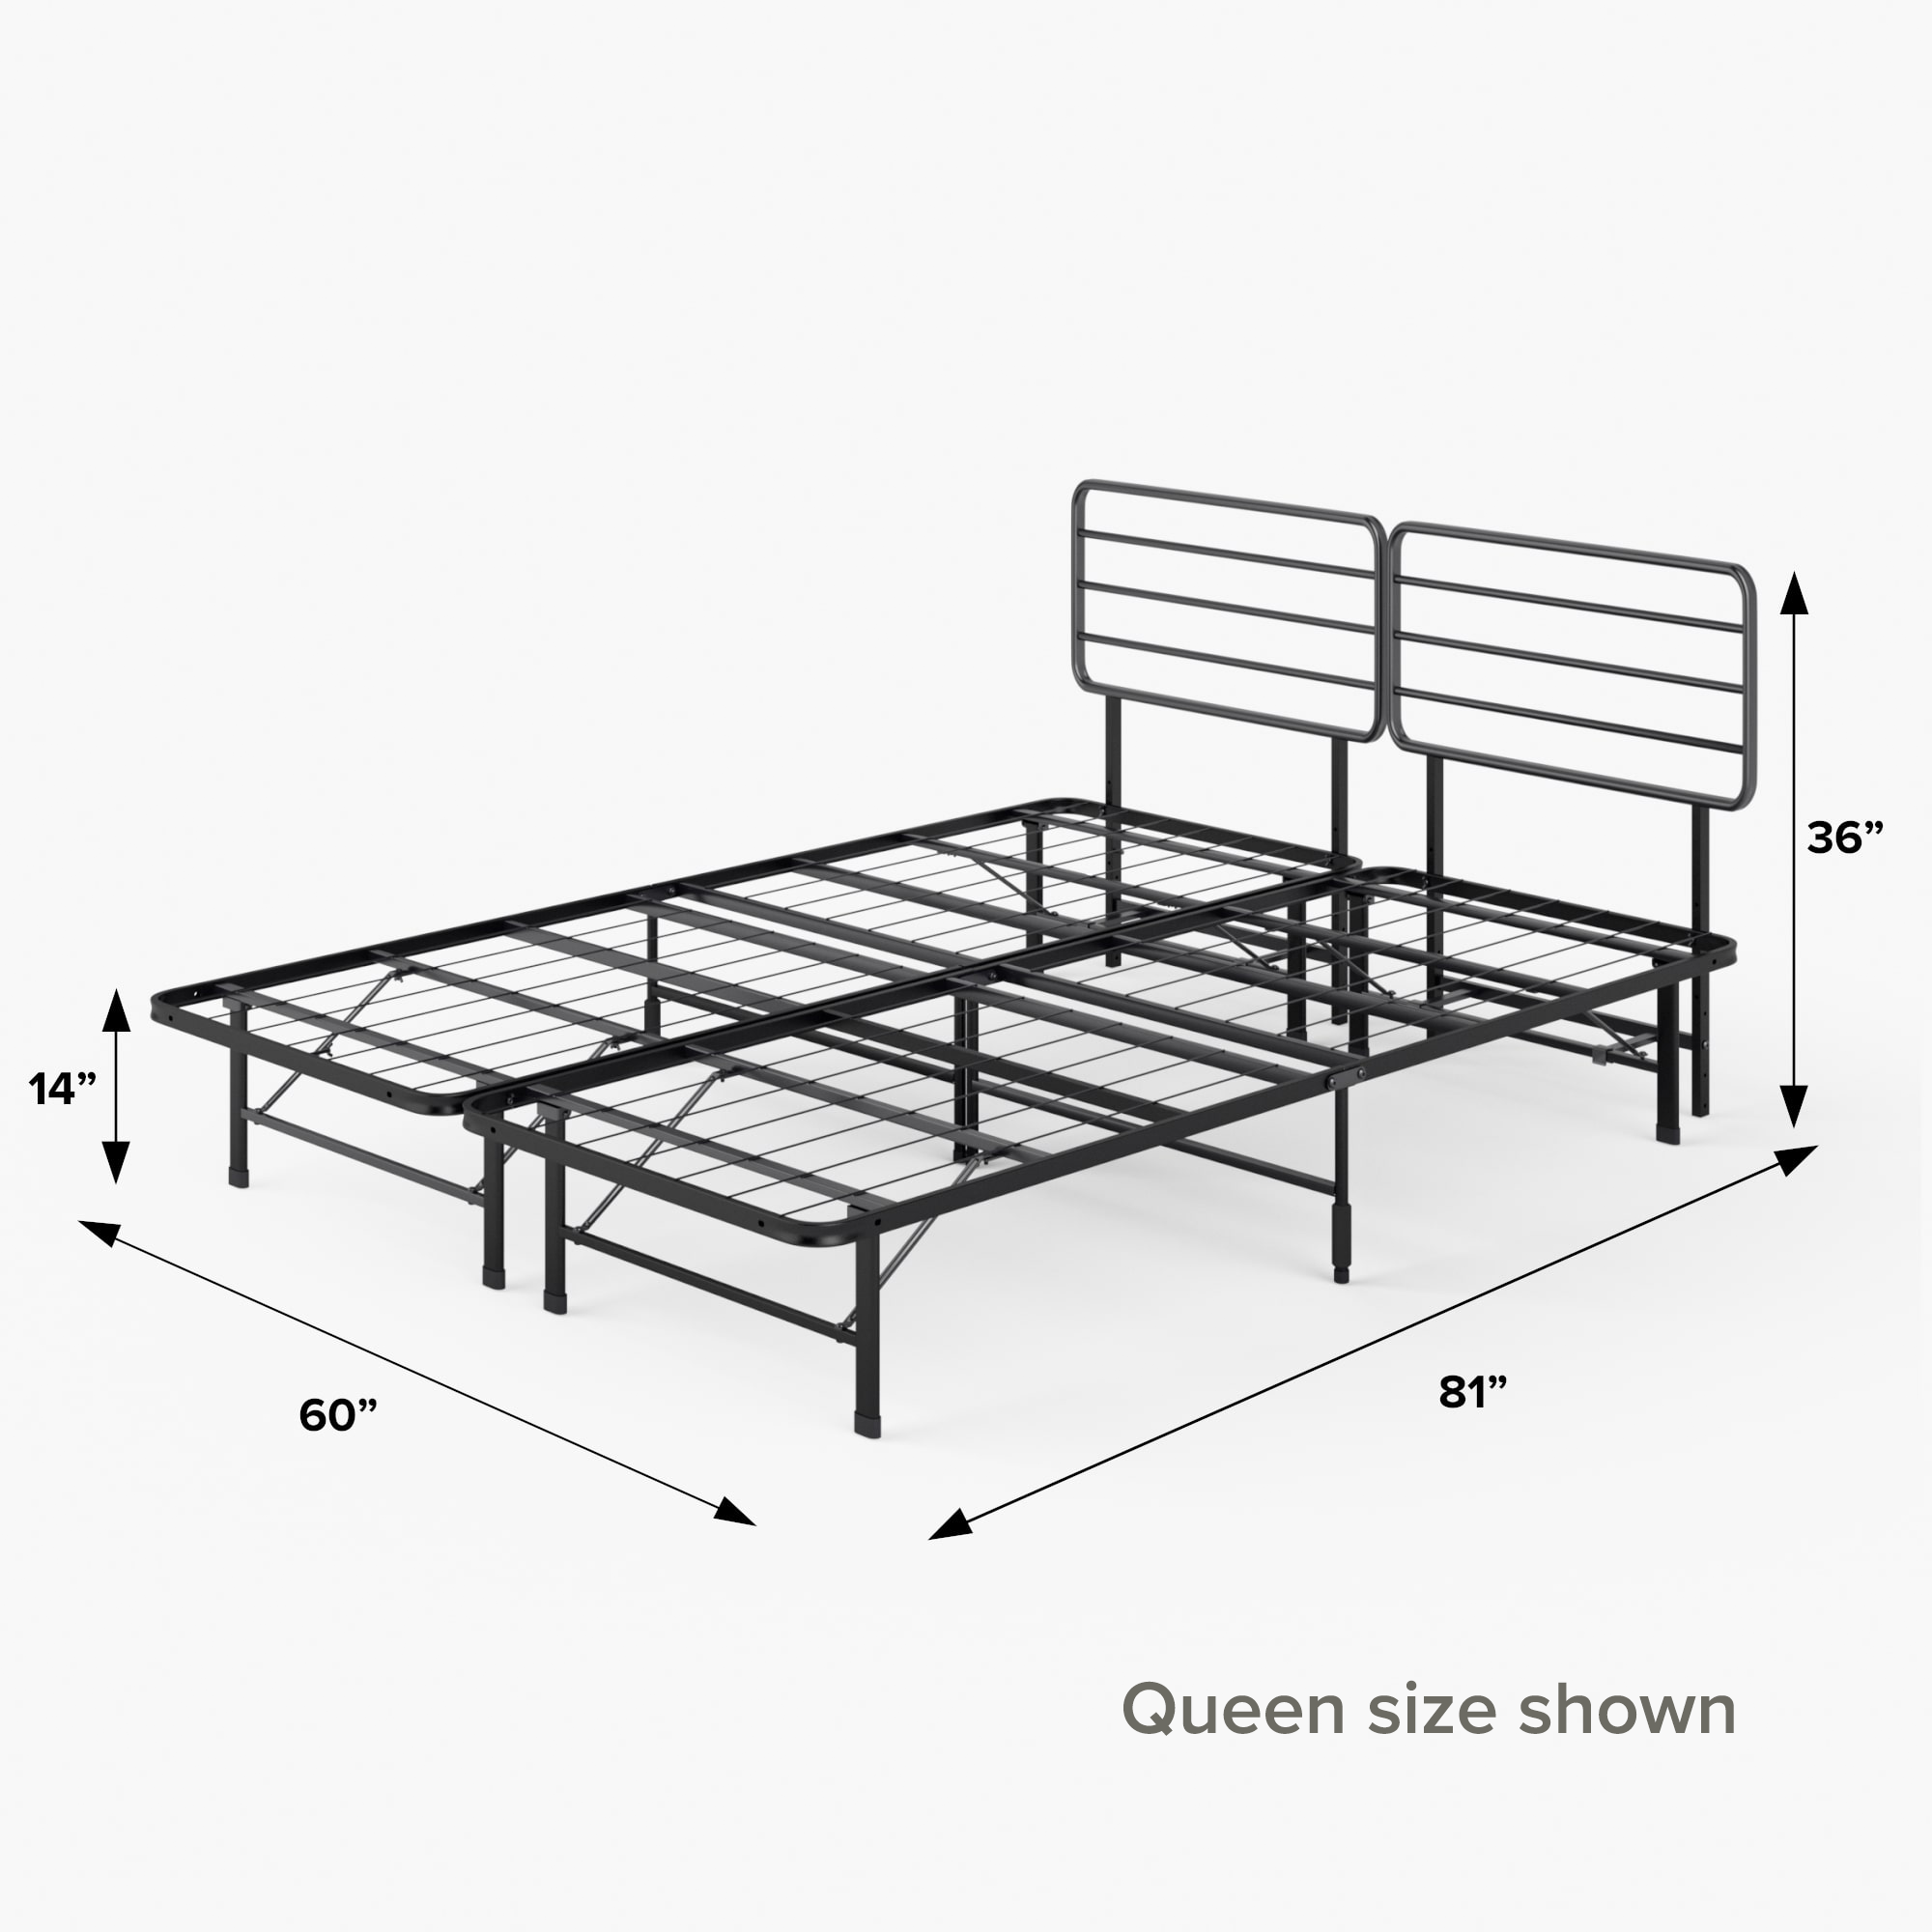 SmartBase Mattress Foundation with Headboard queen size shown